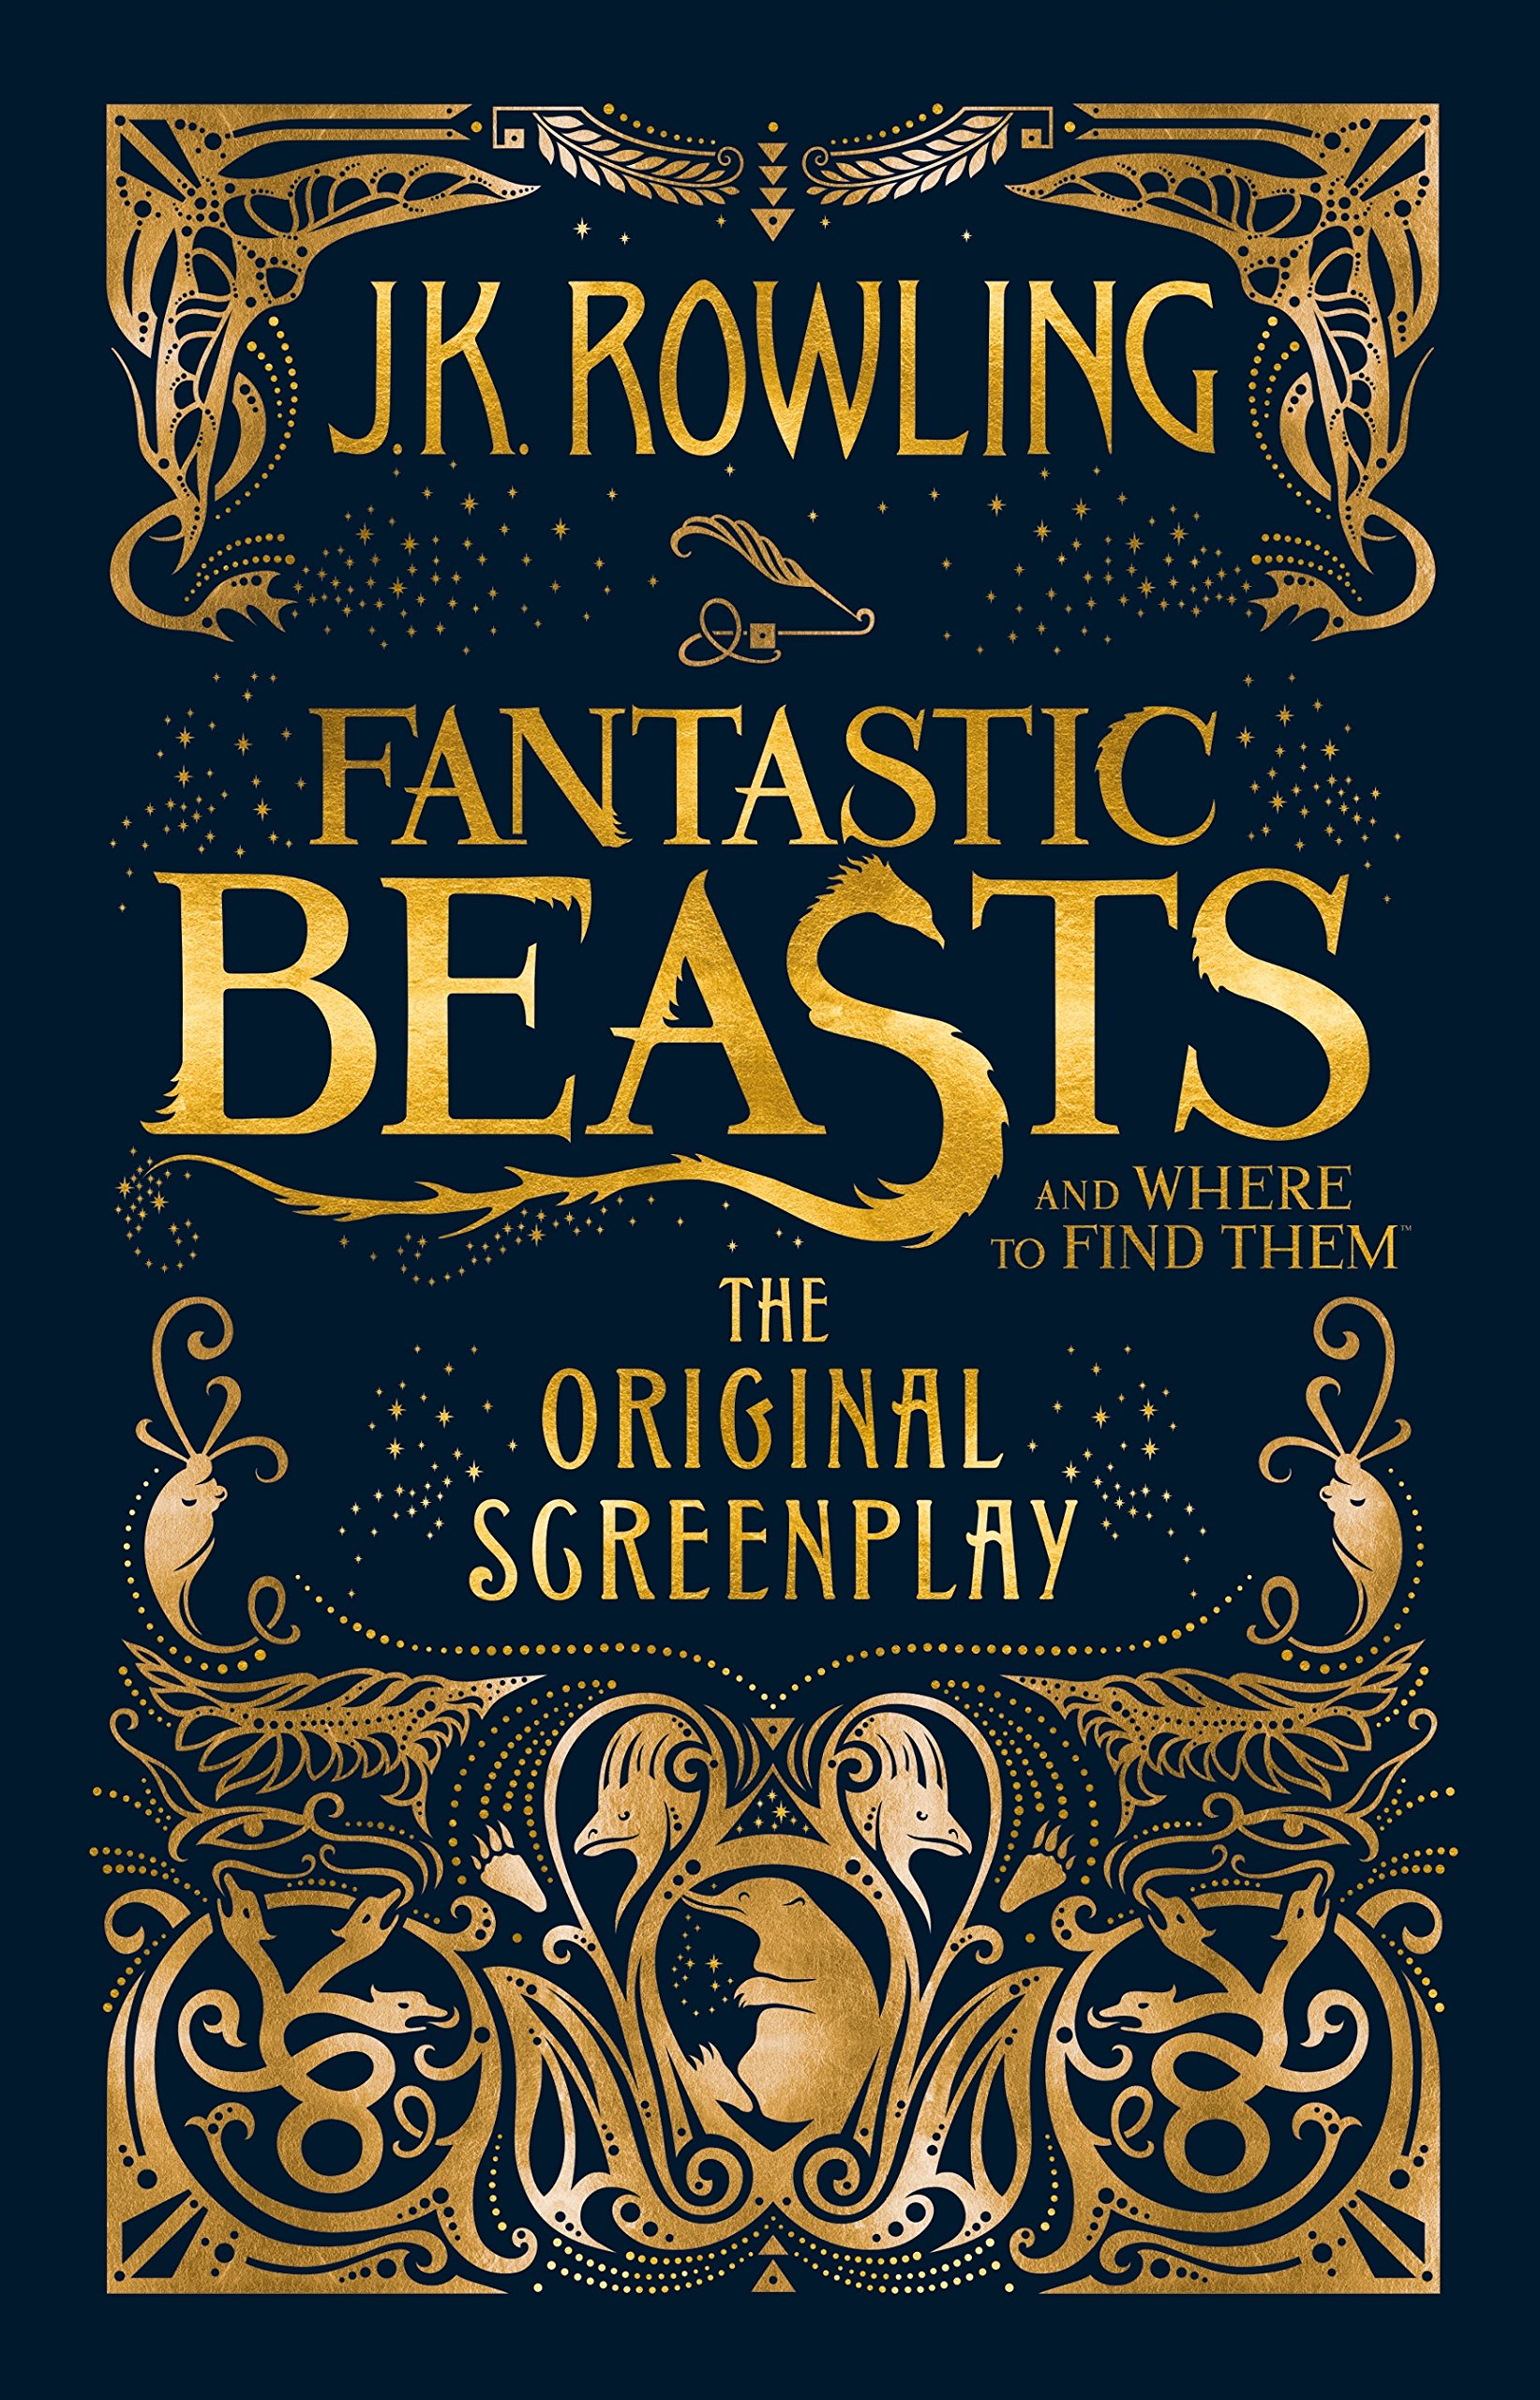 Fantastic Beasts and Where to Find Them: The Original Screenplay | J.K. Rowling